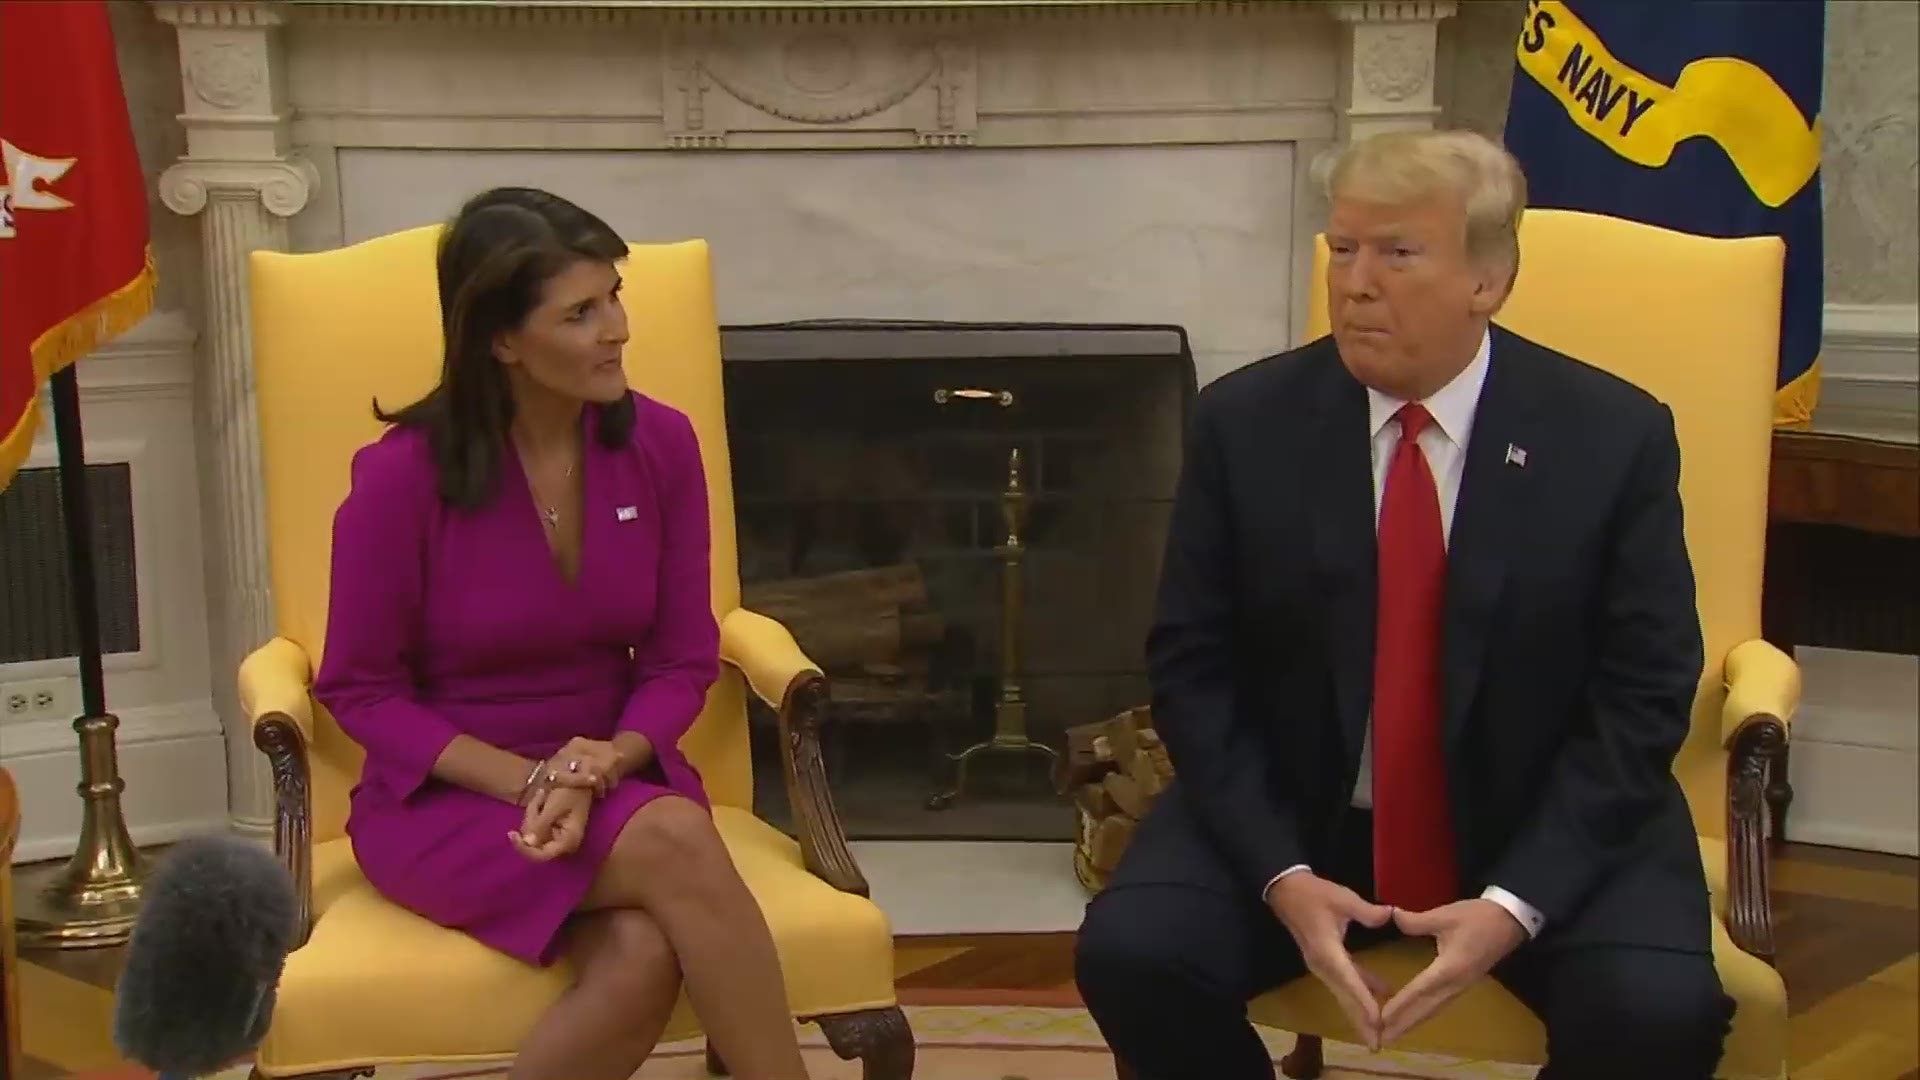 Nikki Haley, joined by President Donald Trump, announced she will leave her post at U.N. Ambassador at the end of the year.